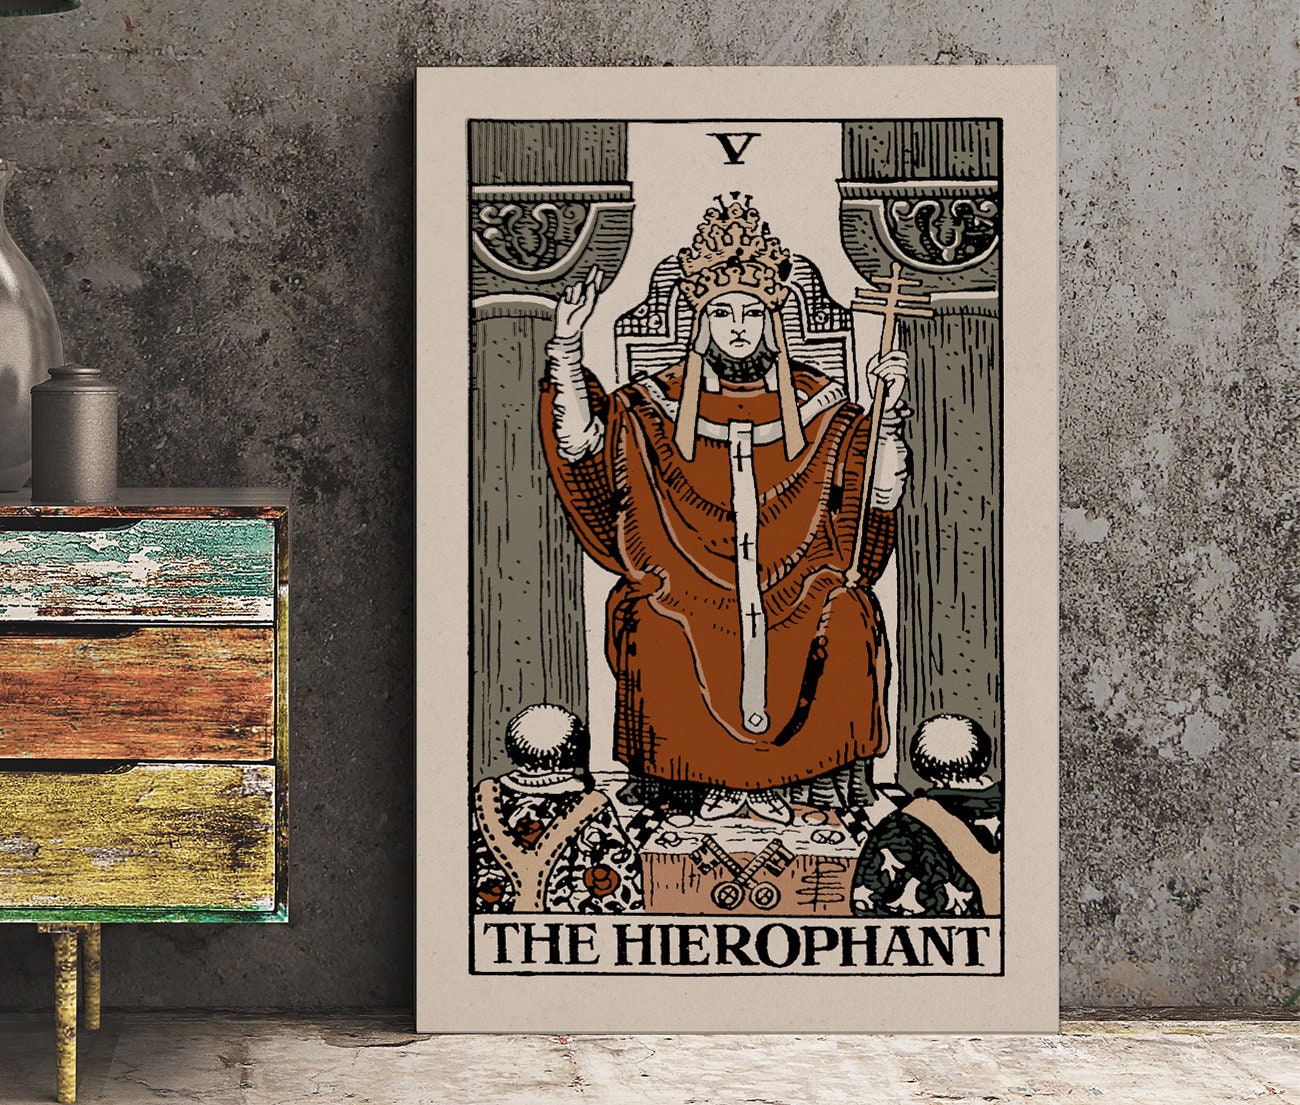 The Hierophant Tarot Card Meaning According to A. E. Waite